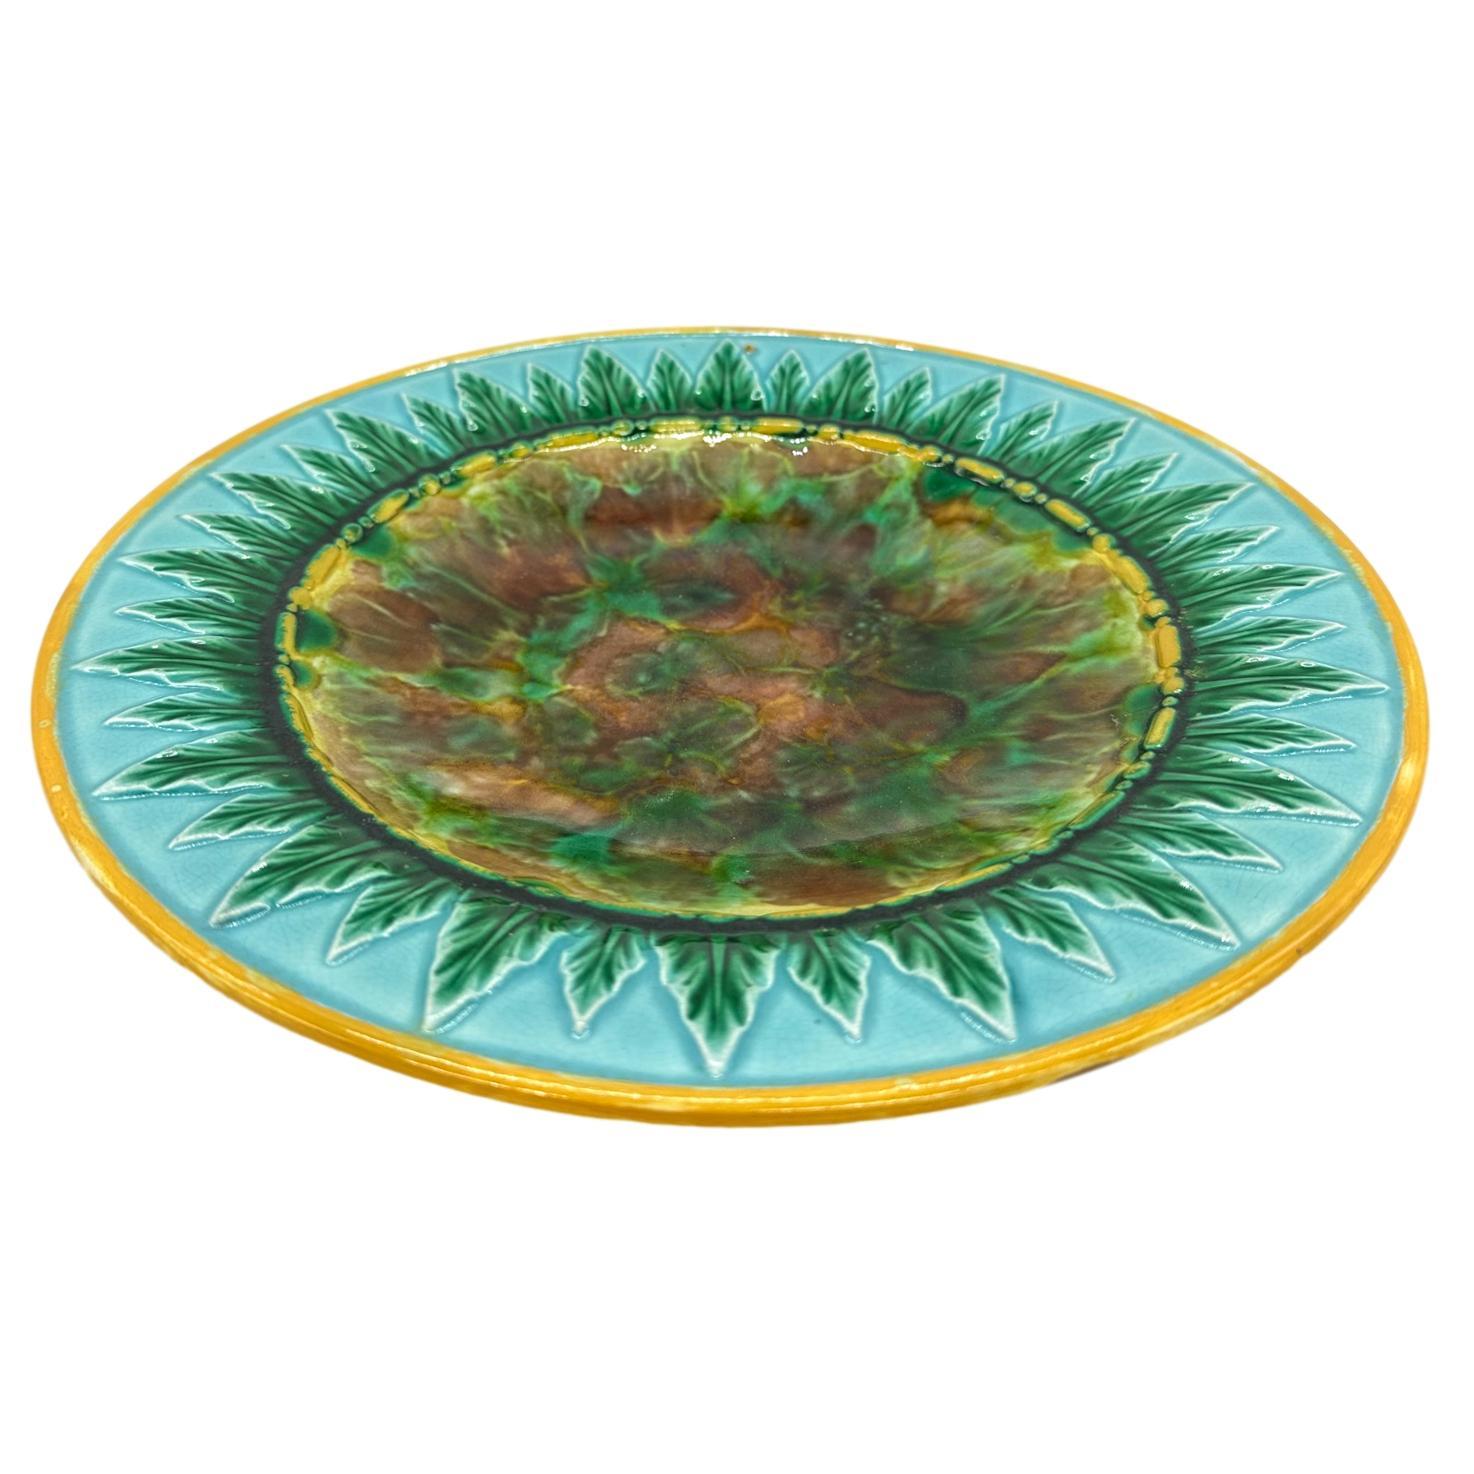 George Jones Majolica Dish, the center with tortoiseshell mottling, bordered with green-glazed acanthus leaves on a turquoise-glazed ground, the inner and outer border rims glazed in yellow ocher, the reverse with impressed 'GJ' monogram and painted